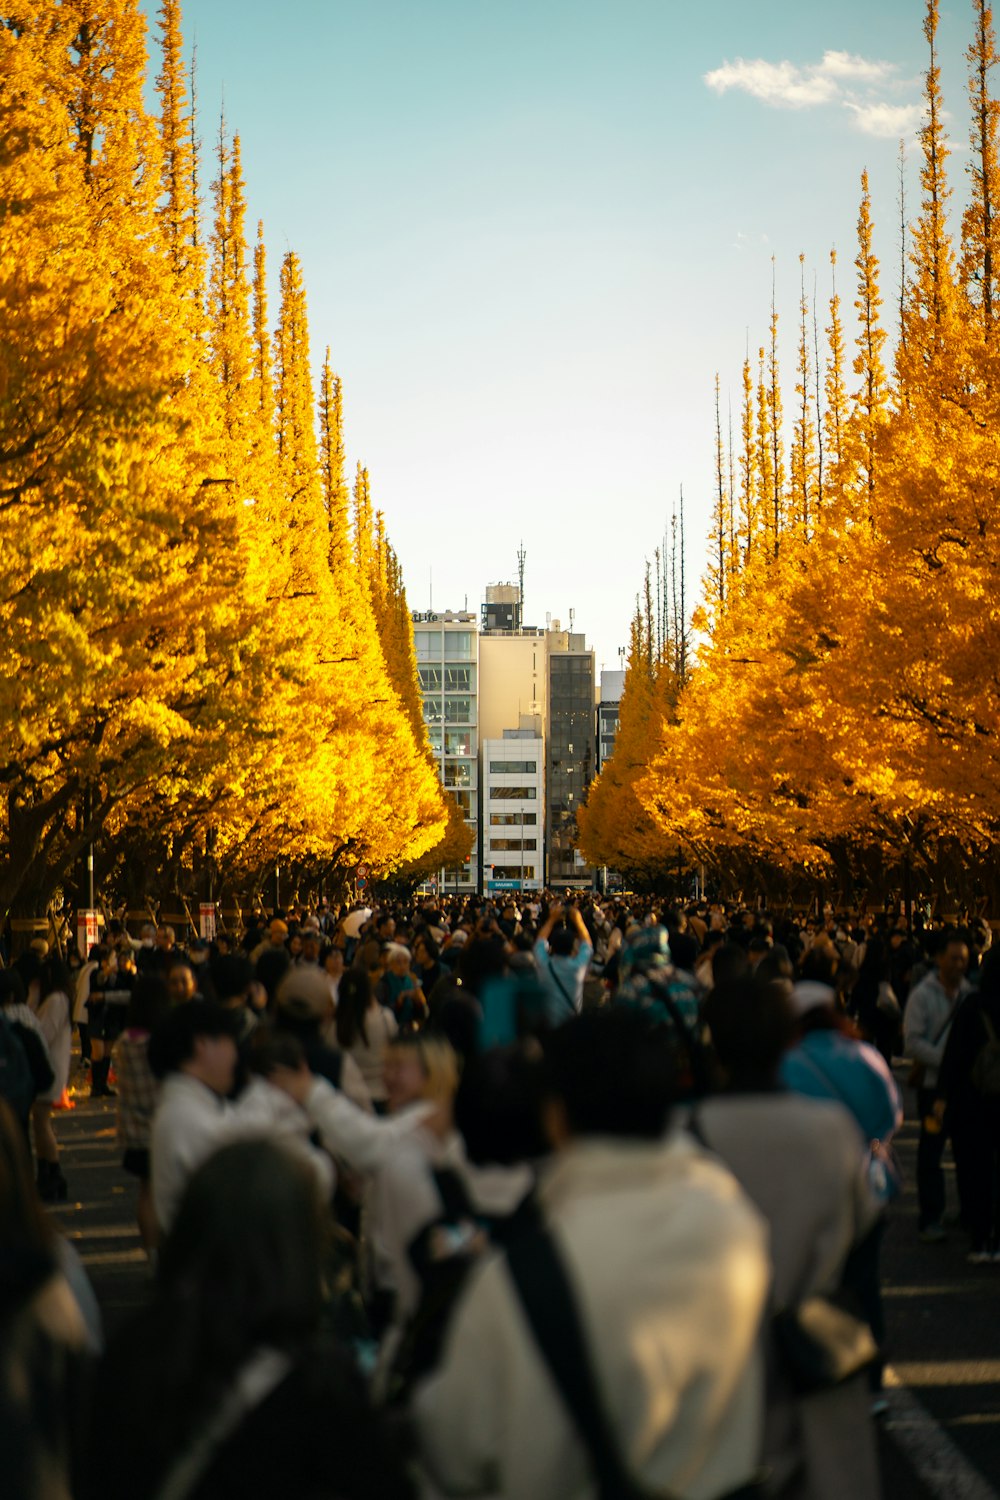 a crowd of people walking down a street next to tall trees